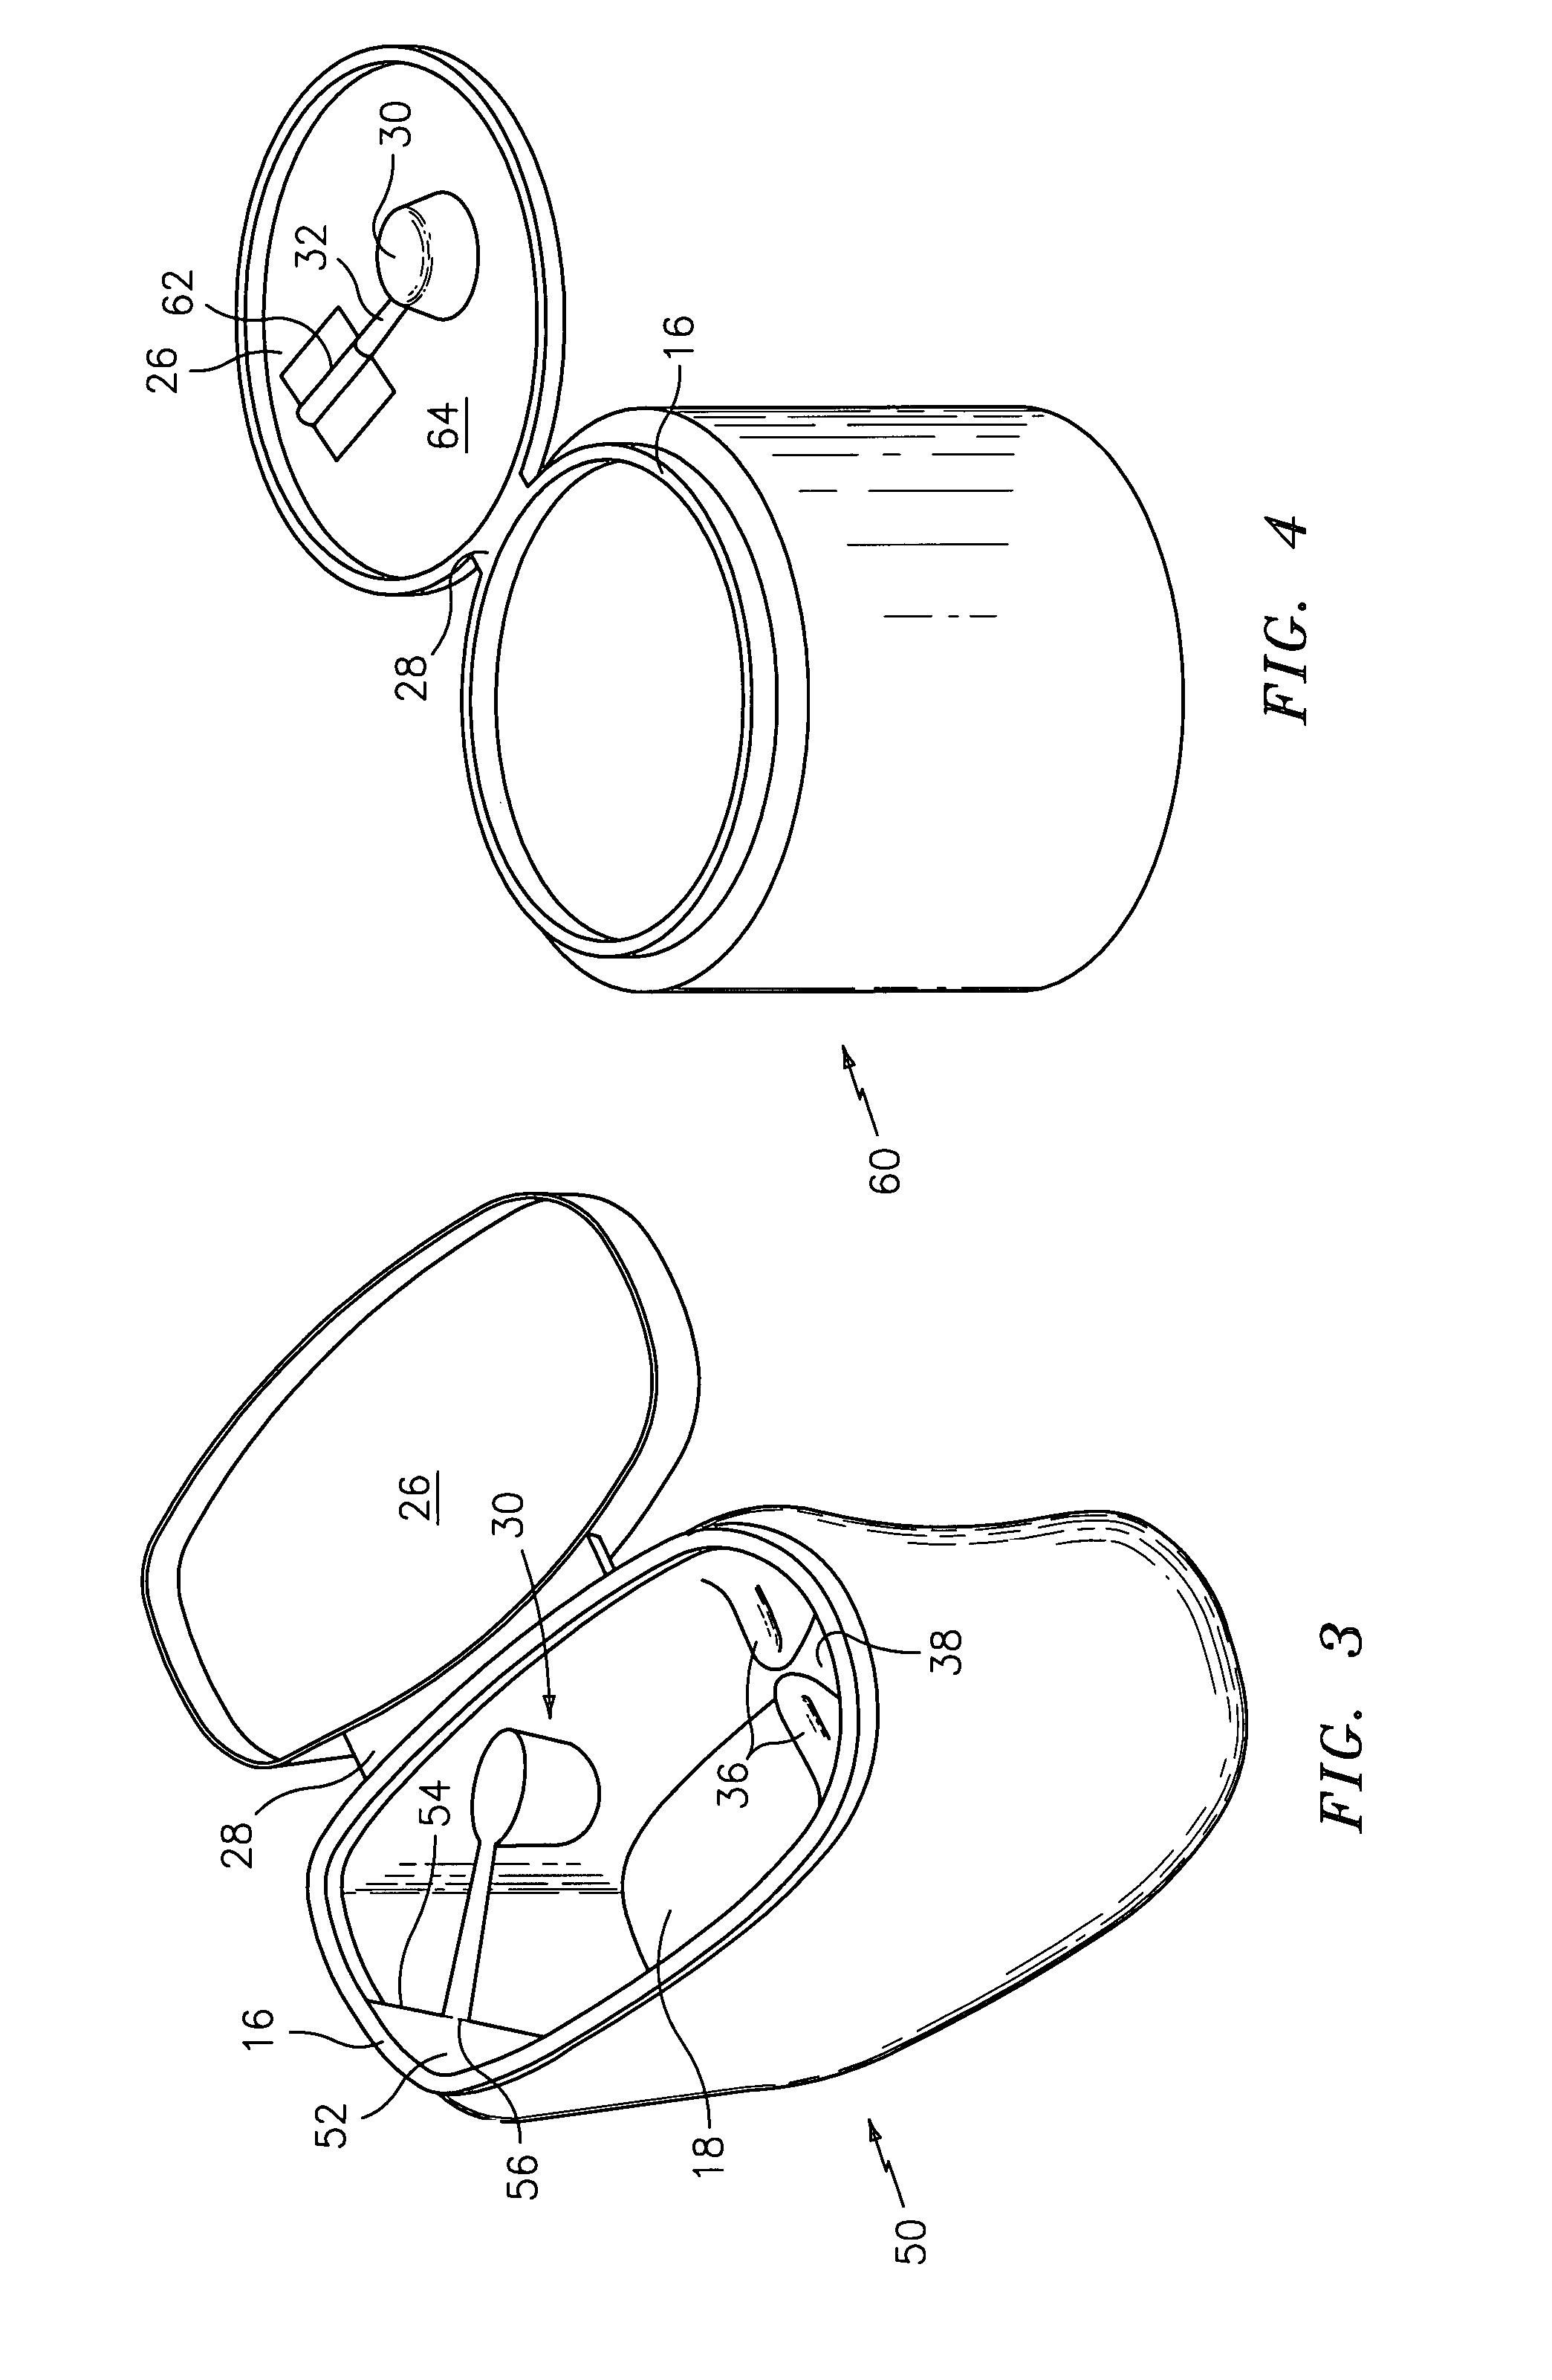 Container with measuring device holding means